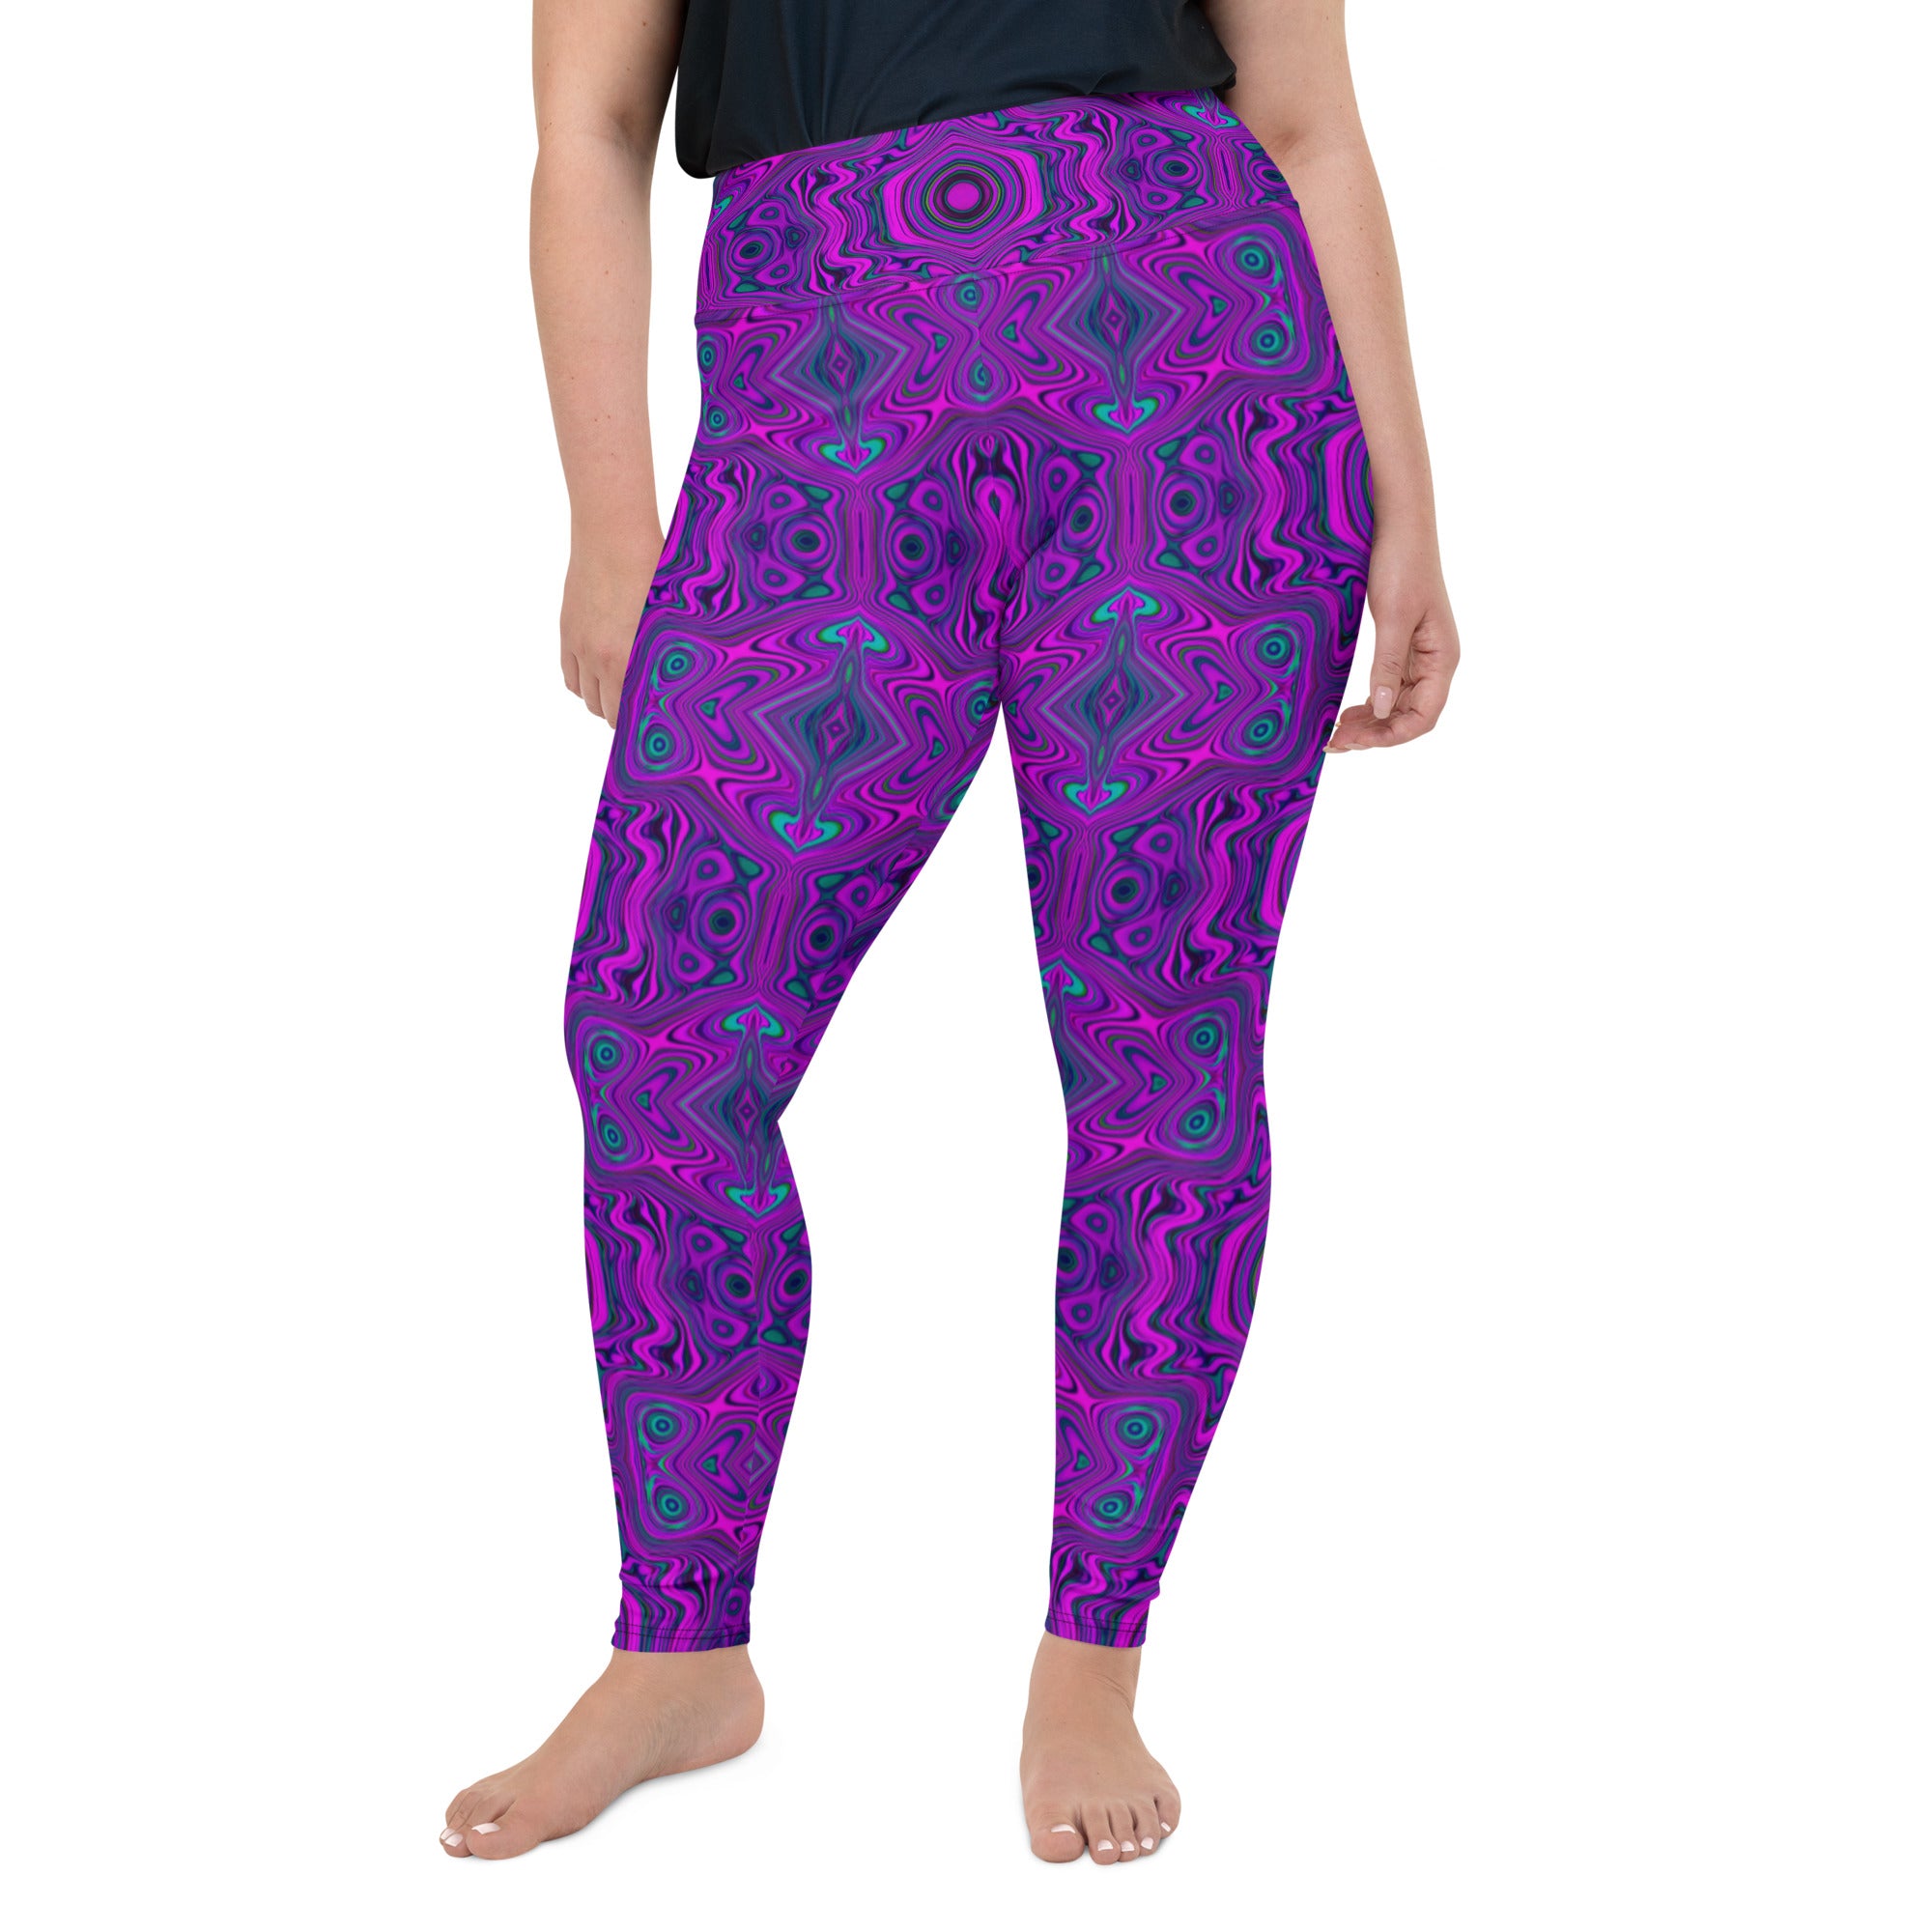 Plus Size Leggings, Trippy Retro Magenta and Black Abstract Pattern